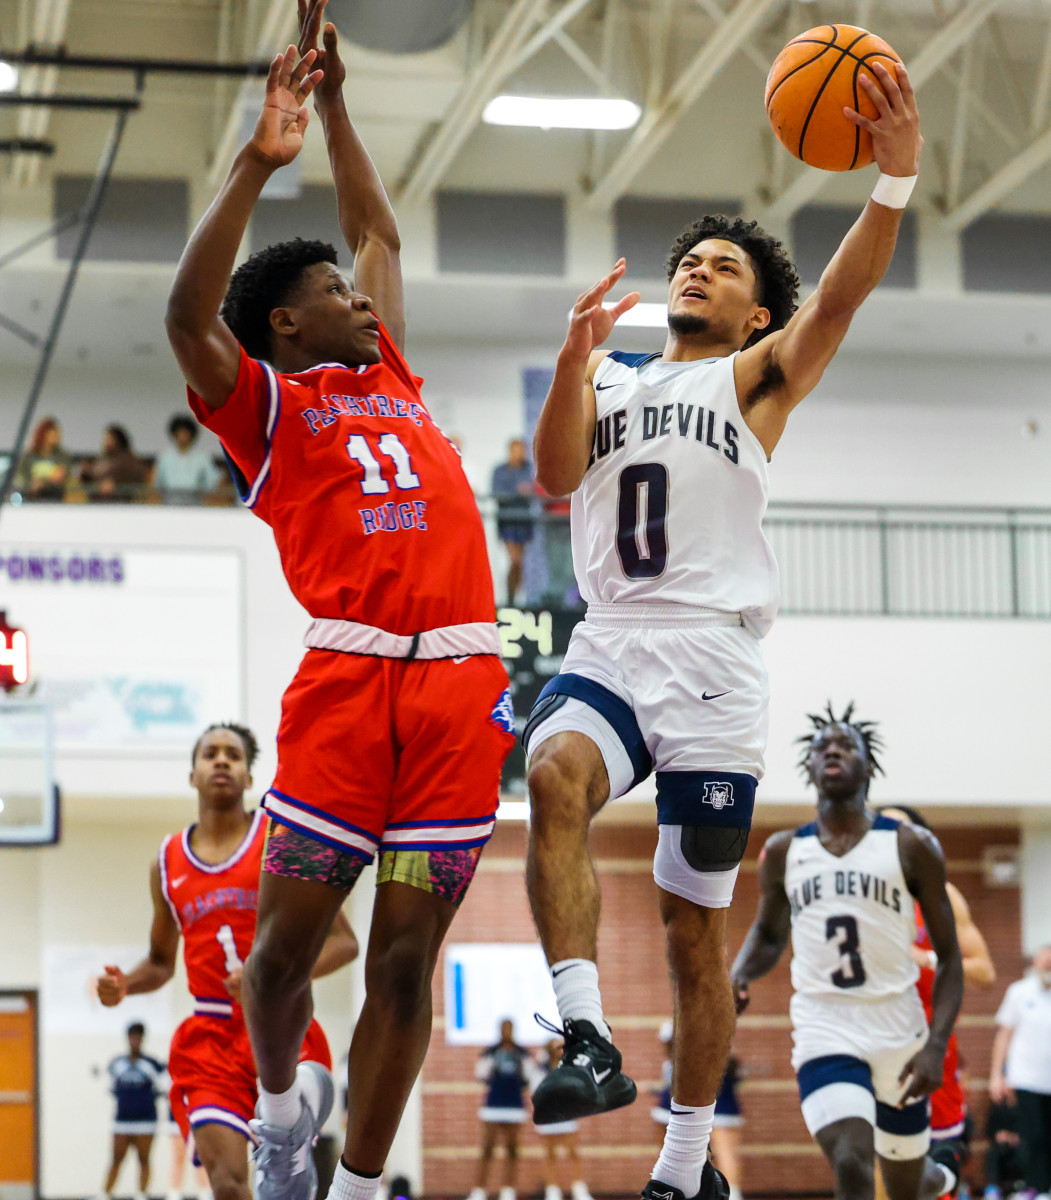 Against the strong defense of Peachtree Ridge's Milz Tatum, Norcross' Bilal Abdur-Rahman makes a strong move to the rim with his left hand.